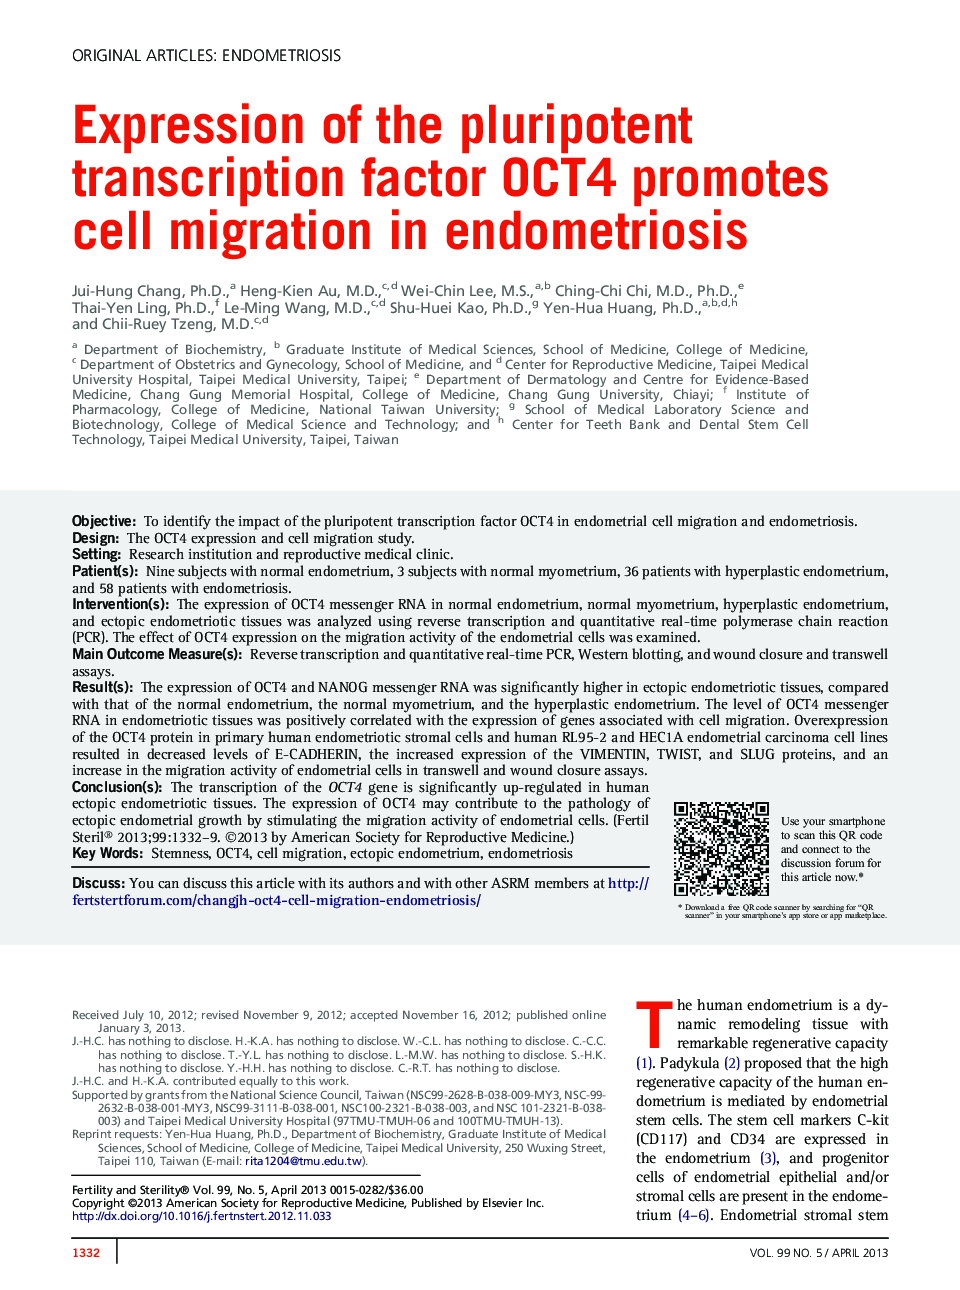 Expression of the pluripotent transcription factor OCT4 promotes cell migration in endometriosis